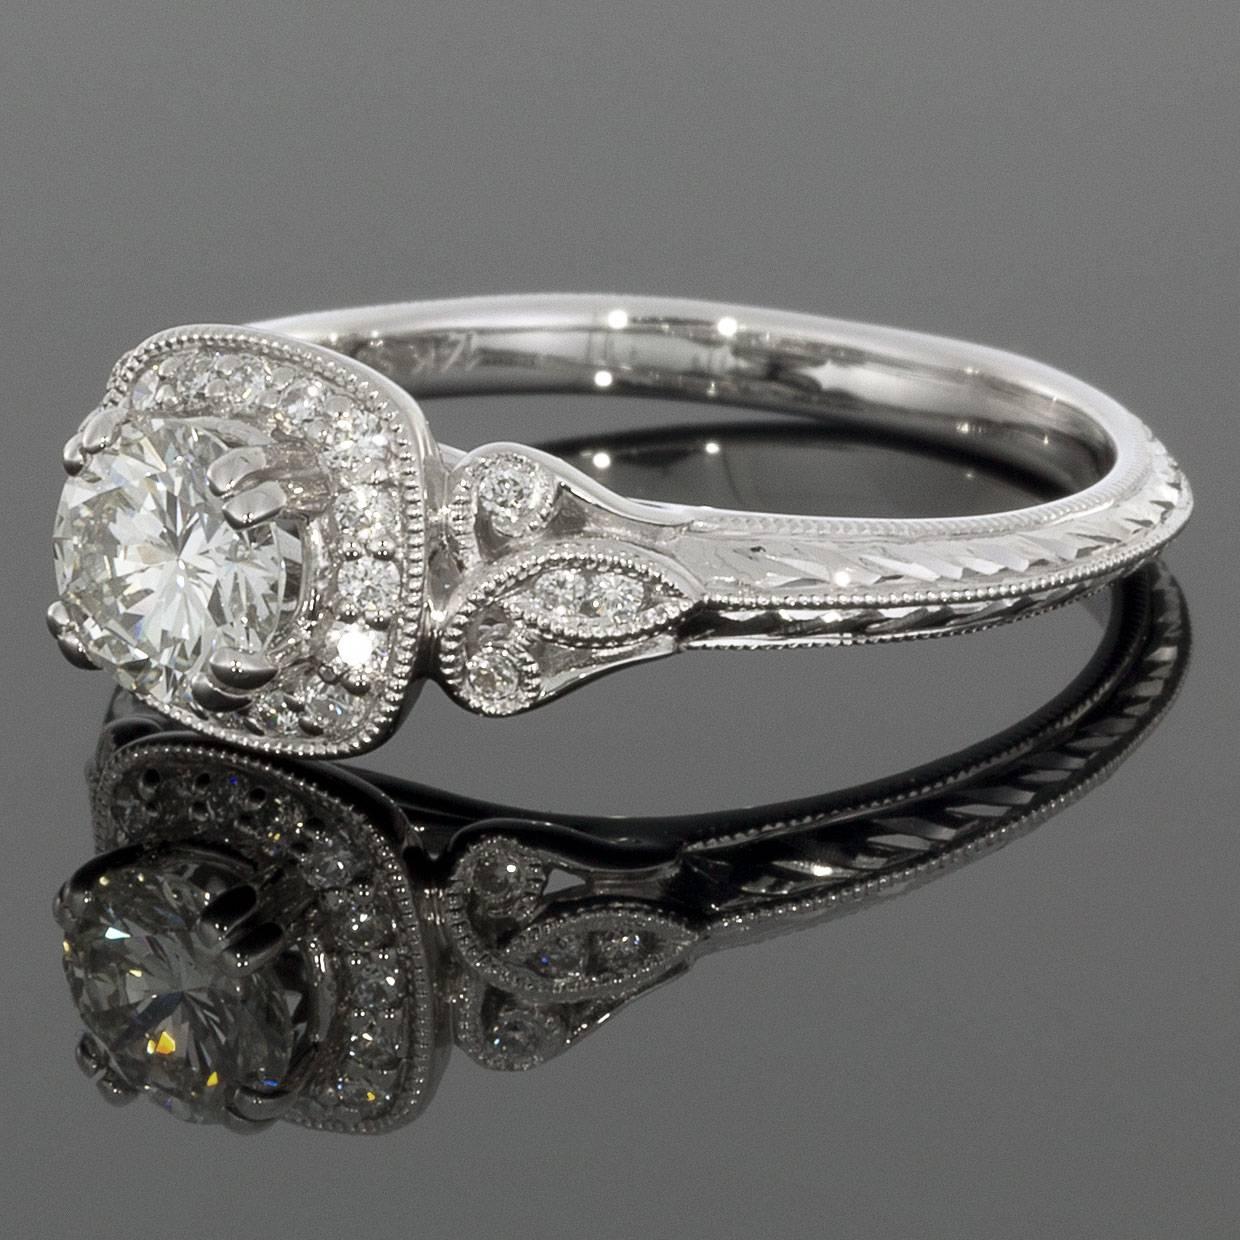 This classically styled band would make a wonderful engagement or anniversary ring. The ring is comprised of 14 karat white gold & features round brilliant cut diamonds that have a combined total weight of 1.17 carats. The diamonds are I/VS2 in